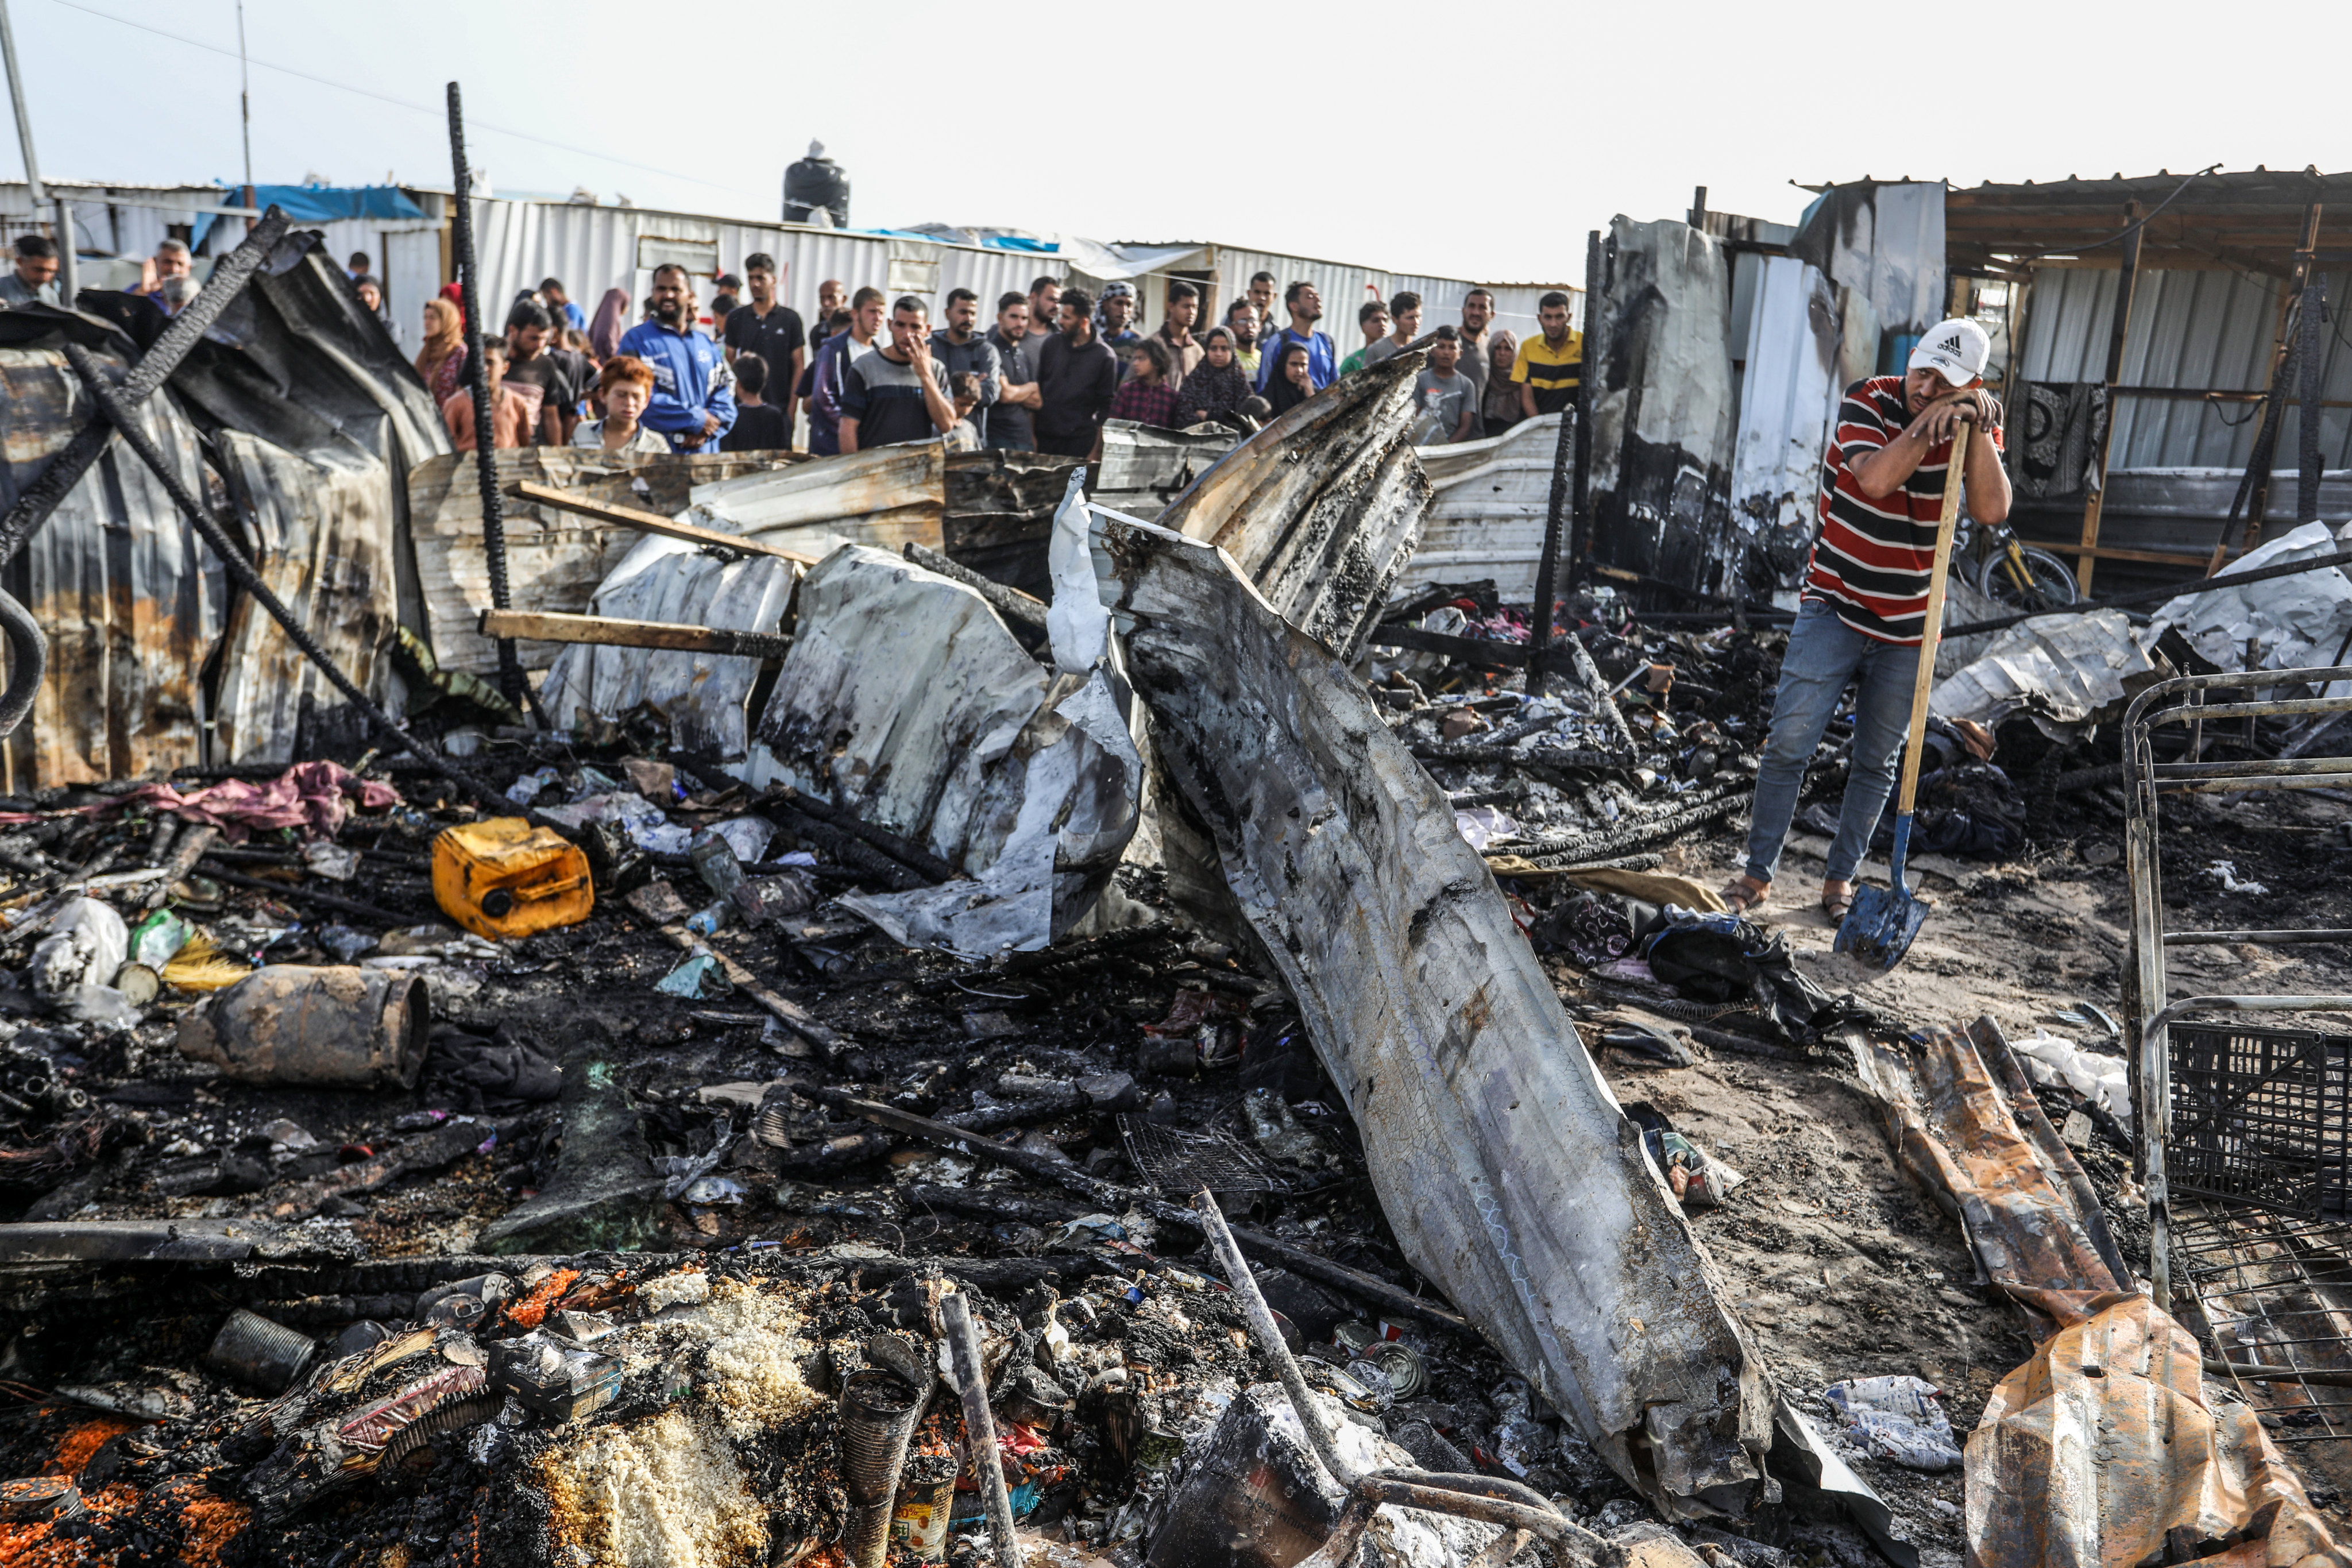 The aftermath of an Israeli air strike that killed dozens at a tent camp near the southern Gaza city of Rafah on Sunday. Photo: dpa